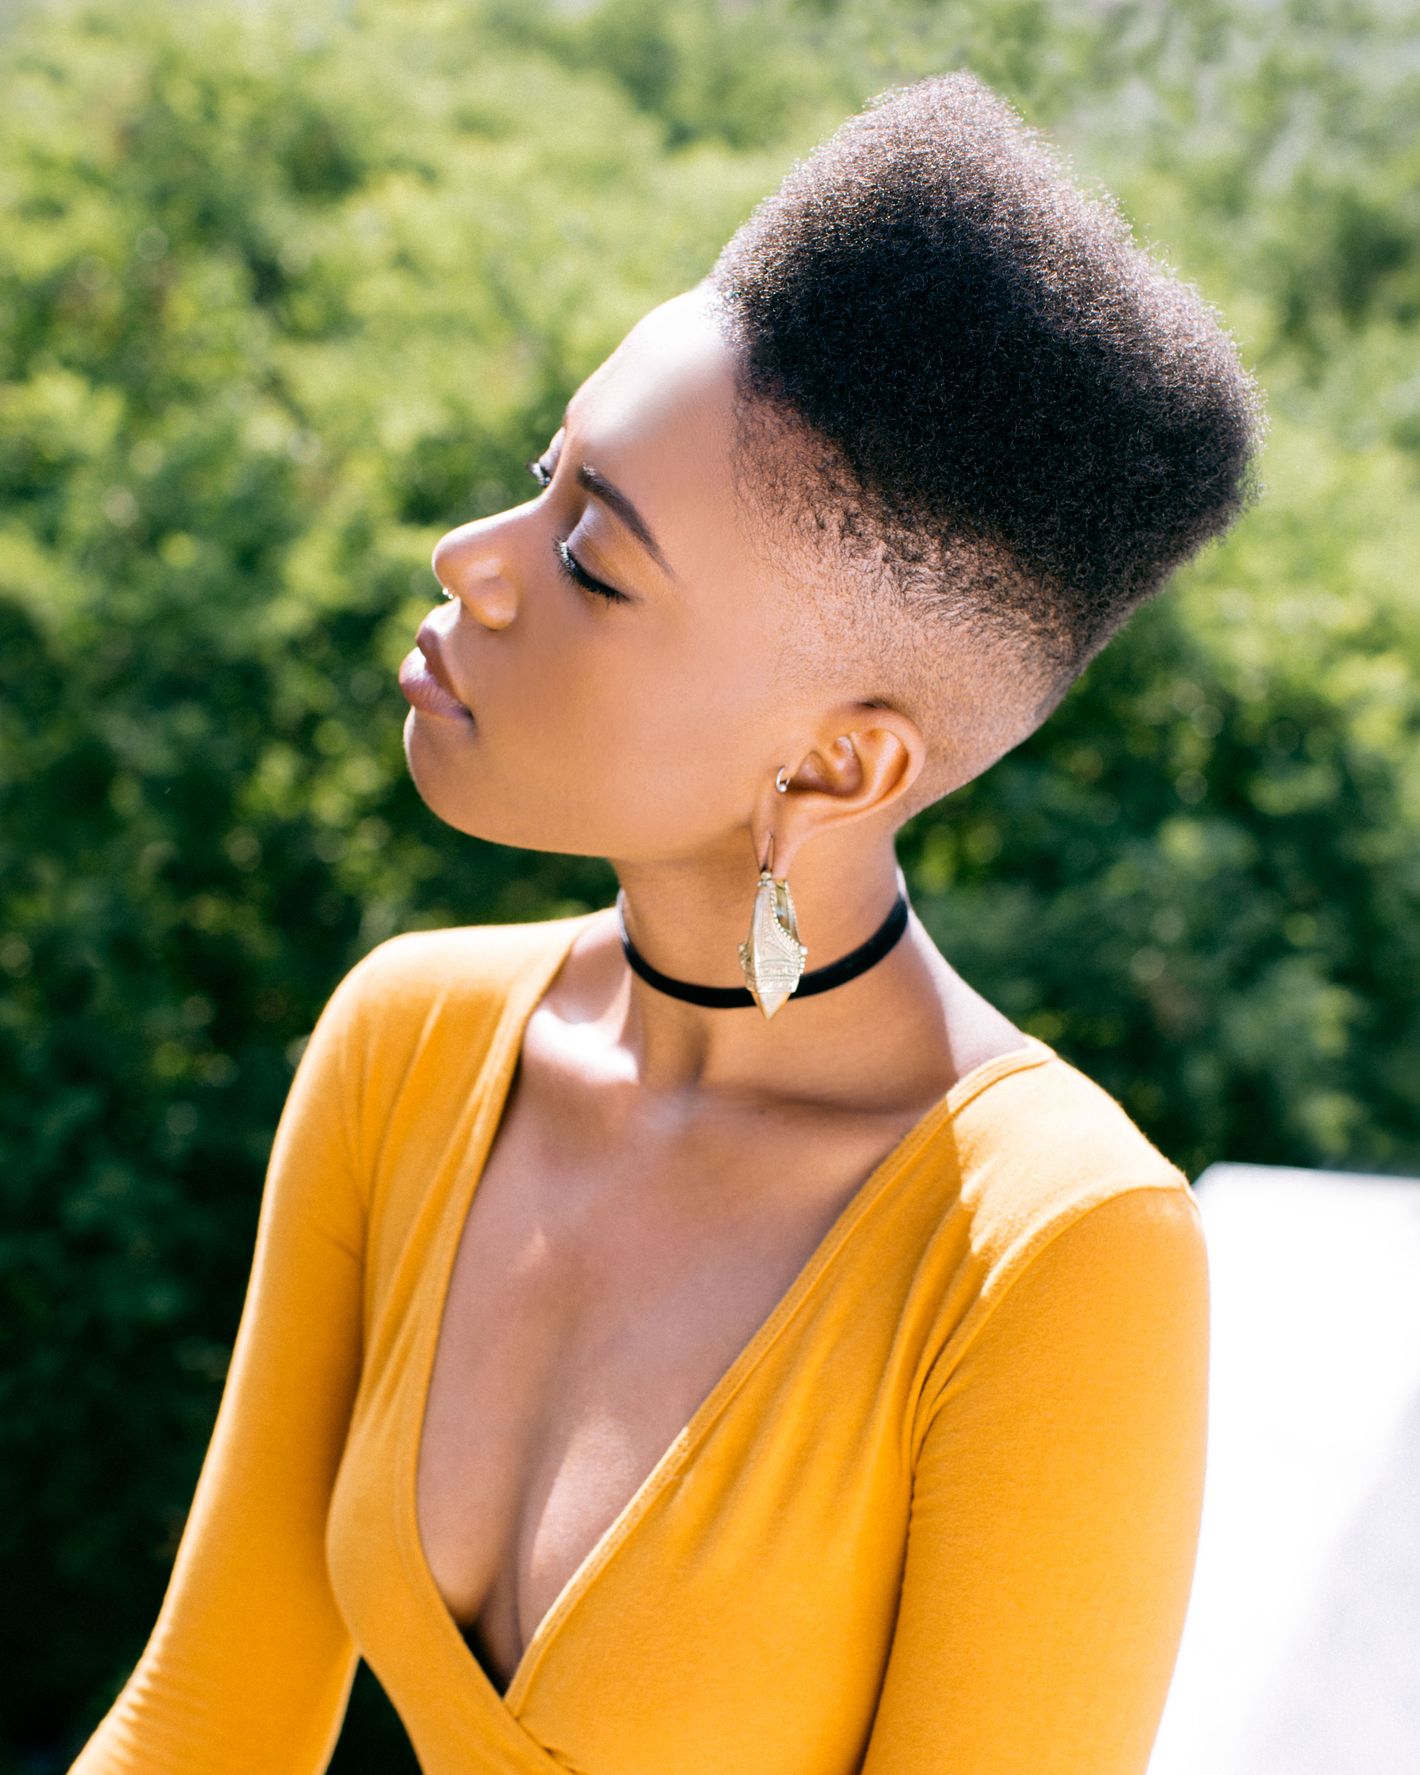 Women's Taper Fade Haircut - Renew your look with this trendy